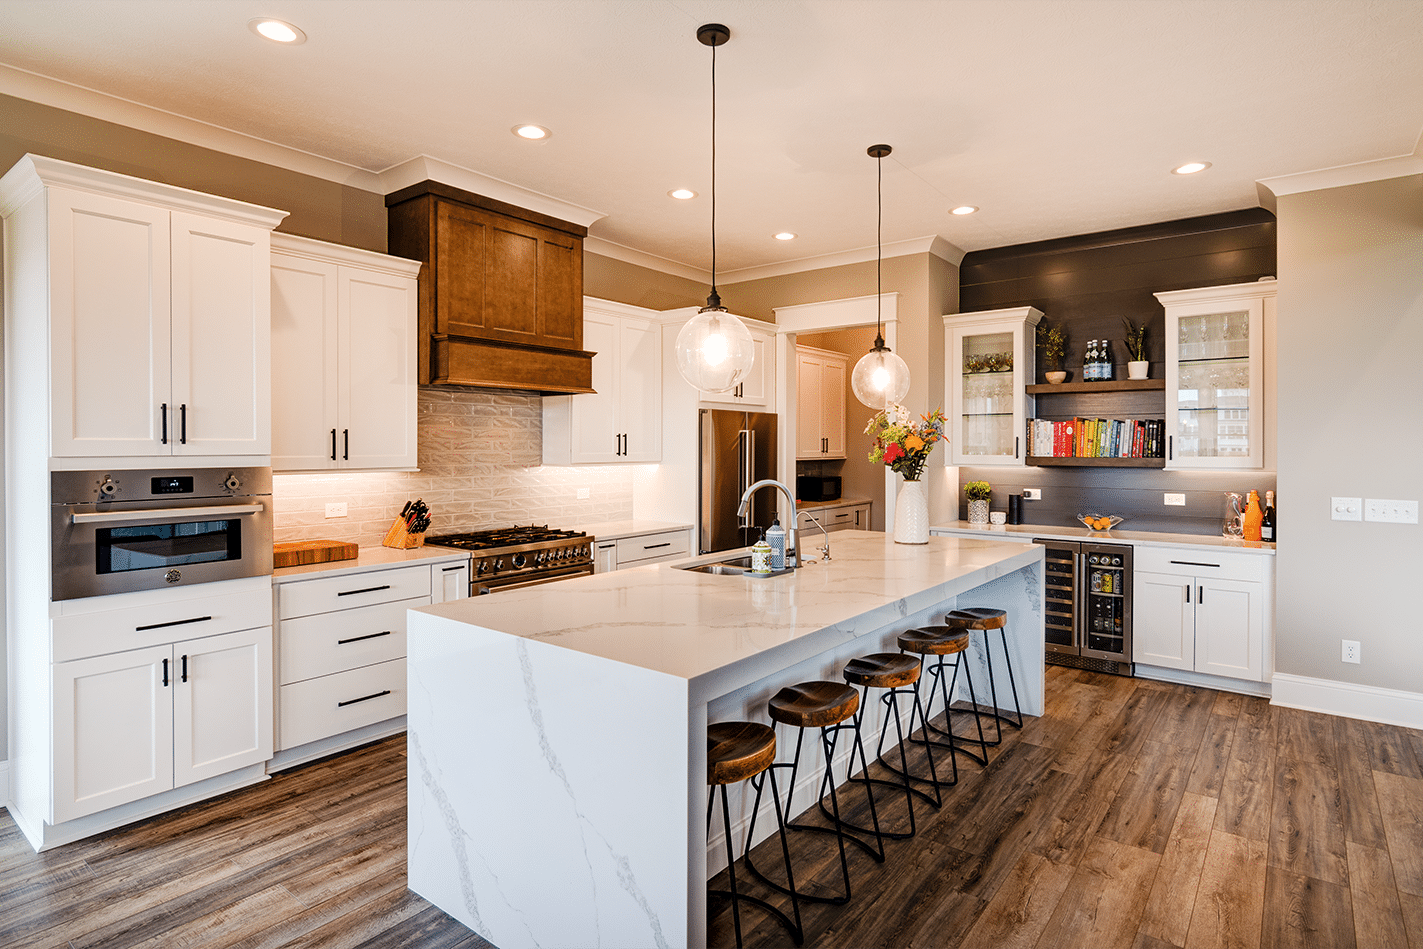 A kitchen with white cabinets and a center island. Our custom home builder in Fishers, Indiana can create your dream kitchen with white cabinets and a stylish center island.